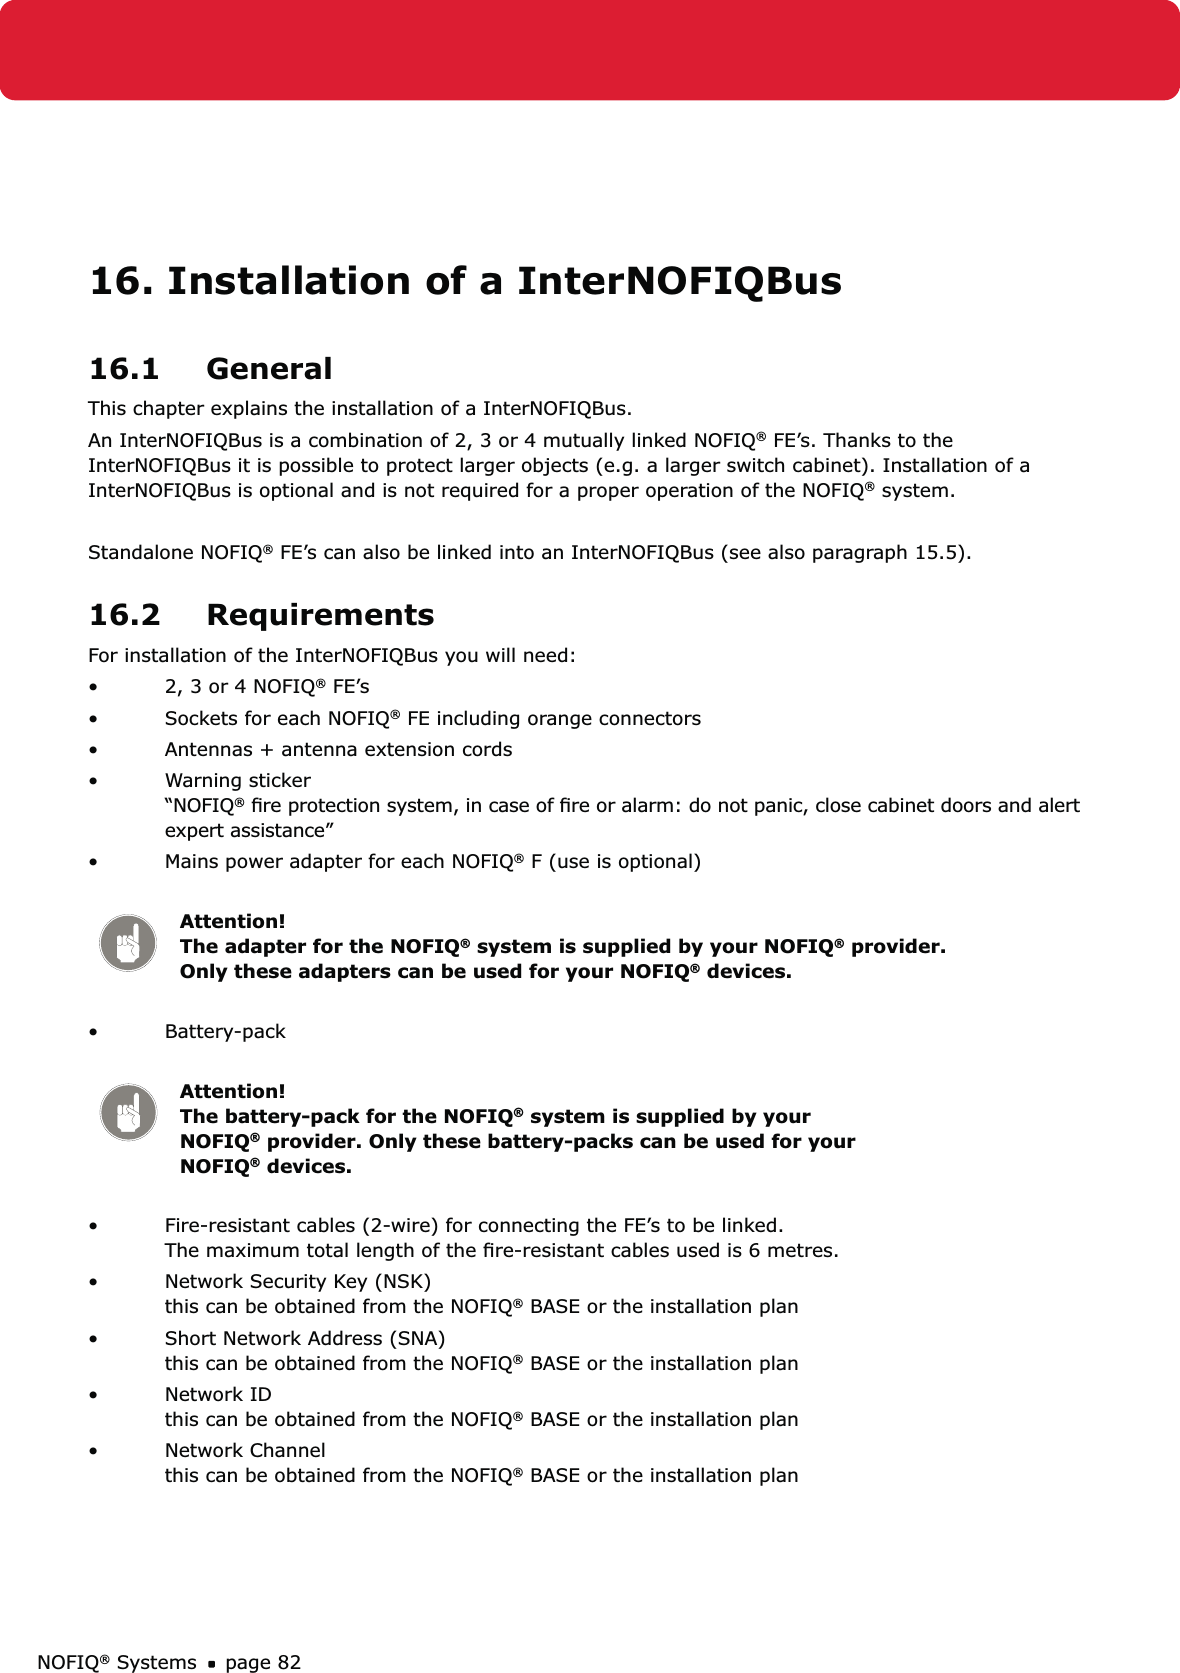 NOFIQ® Systems page 8216. Installation of a InterNOFIQBus16.1 GeneralThis chapter explains the installation of a InterNOFIQBus. An InterNOFIQBus is a combination of 2, 3 or 4 mutually linked NOFIQ® FE’s. Thanks to the InterNOFIQBus it is possible to protect larger objects (e.g. a larger switch cabinet). Installation of a InterNOFIQBus is optional and is not required for a proper operation of the NOFIQ® system.Standalone NOFIQ® FE’s can also be linked into an InterNOFIQBus (see also paragraph 15.5).16.2 RequirementsFor installation of the InterNOFIQBus you will need:2, 3 or 4 NOFIQ•  ® FE’sSockets for each NOFIQ•  ® FE including orange connectorsAntennas + antenna extension cords • Warning sticker    • “NOFIQ® ﬁre protection system, in case of ﬁre or alarm: do not panic, close cabinet doors and alert expert assistance”Mains power adapter for each NOFIQ•  ® F (use is optional) Attention!   The adapter for the NOFIQ® system is supplied by your NOFIQ® provider. Only these adapters can be used for your NOFIQ® devices.Battery-pack  • Attention!   The battery-pack for the NOFIQ® system is supplied by your NOFIQ® provider. Only these battery-packs can be used for your NOFIQ® devices.Fire-resistant cables (2-wire) for connecting the FE’s to be linked. • The maximum total length of the ﬁre-resistant cables used is 6 metres.Network Security Key (NSK)  • this can be obtained from the NOFIQ® BASE or the installation planShort Network Address (SNA) • this can be obtained from the NOFIQ® BASE or the installation planNetwork ID • this can be obtained from the NOFIQ® BASE or the installation planNetwork Channel • this can be obtained from the NOFIQ® BASE or the installation plan